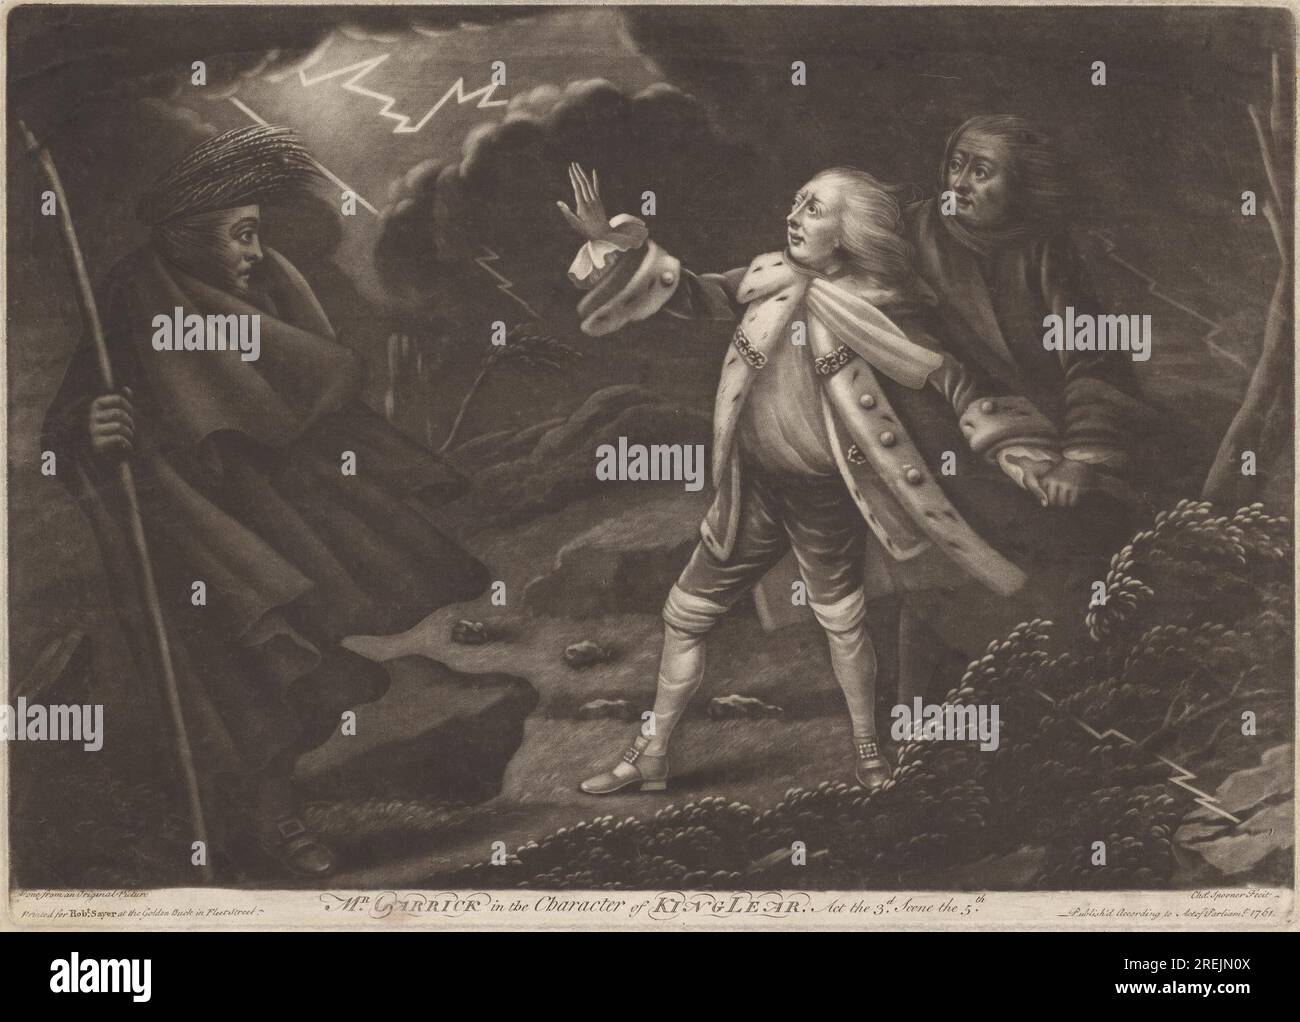 Mr. Garrick in the Character of King Lear - "King Lear", Act III, Scene V 1761 by Charles Spooner Stock Photo